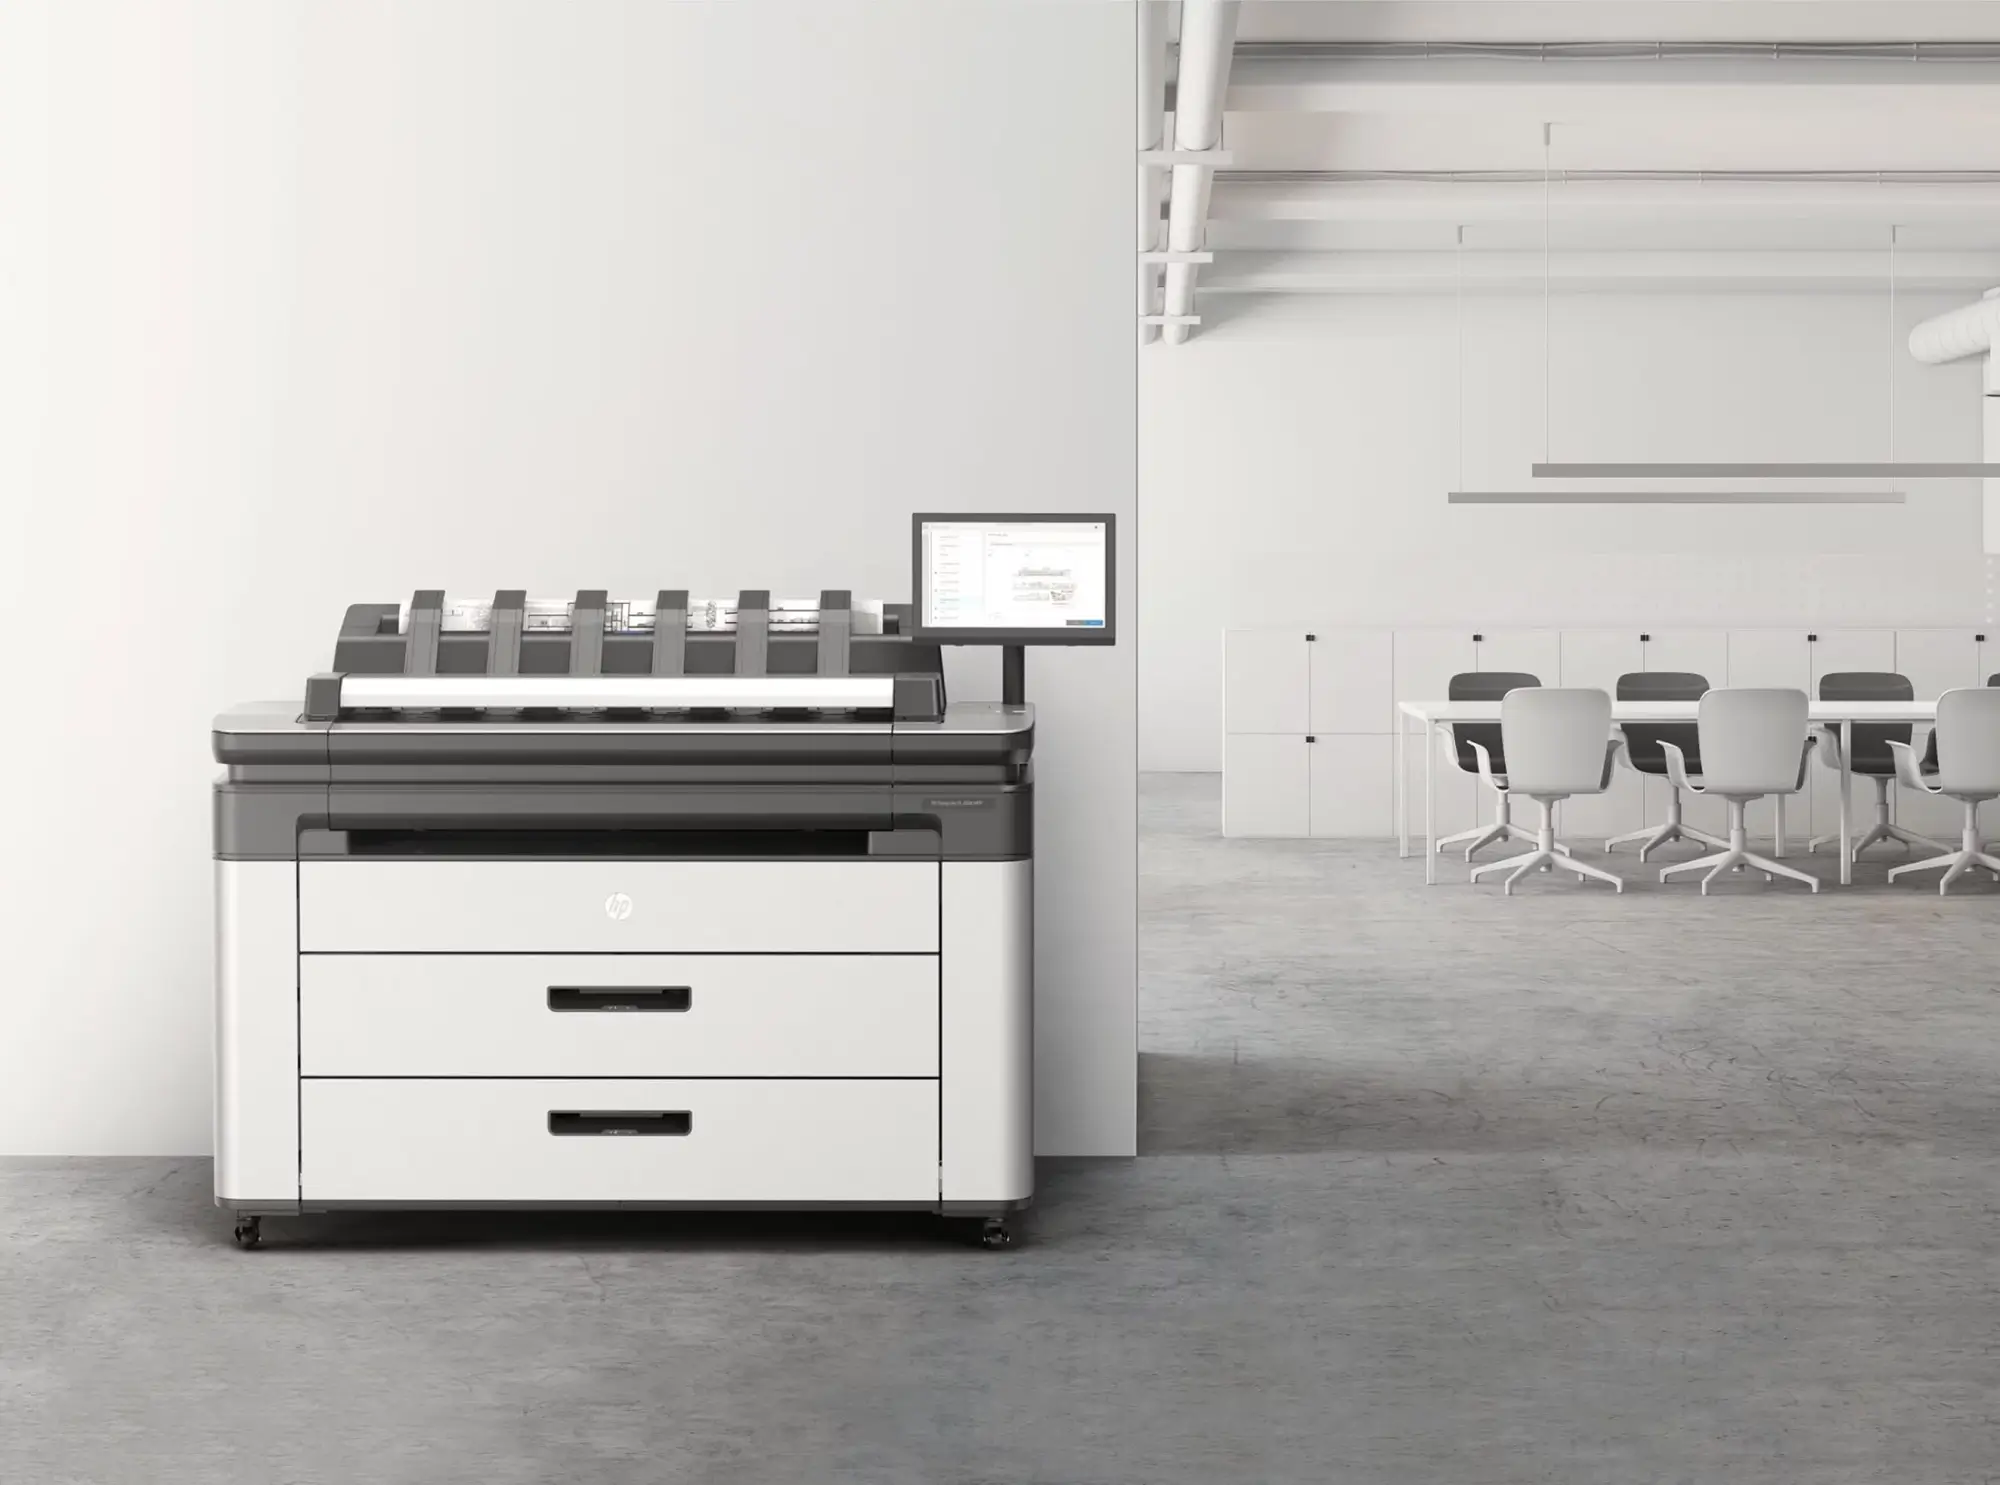 Industrial design of a printer by Nacar Agency for HP